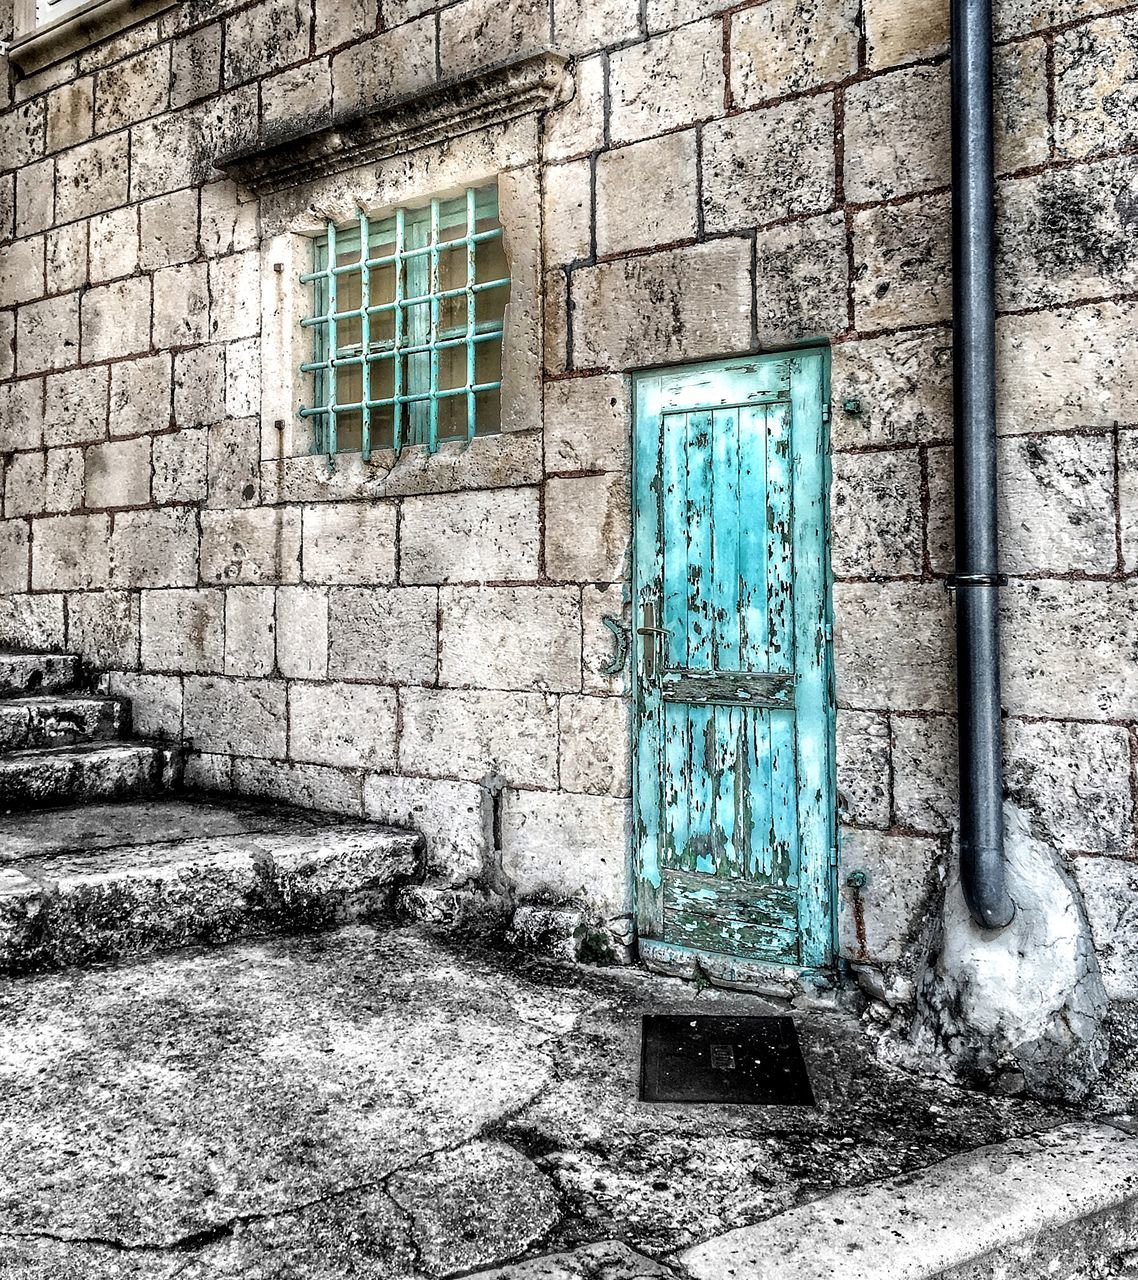 architecture, built structure, building exterior, wall, wall - building feature, window, no people, building, day, abandoned, brick, old, brick wall, house, outdoors, door, weathered, entrance, closed, run-down, turquoise colored